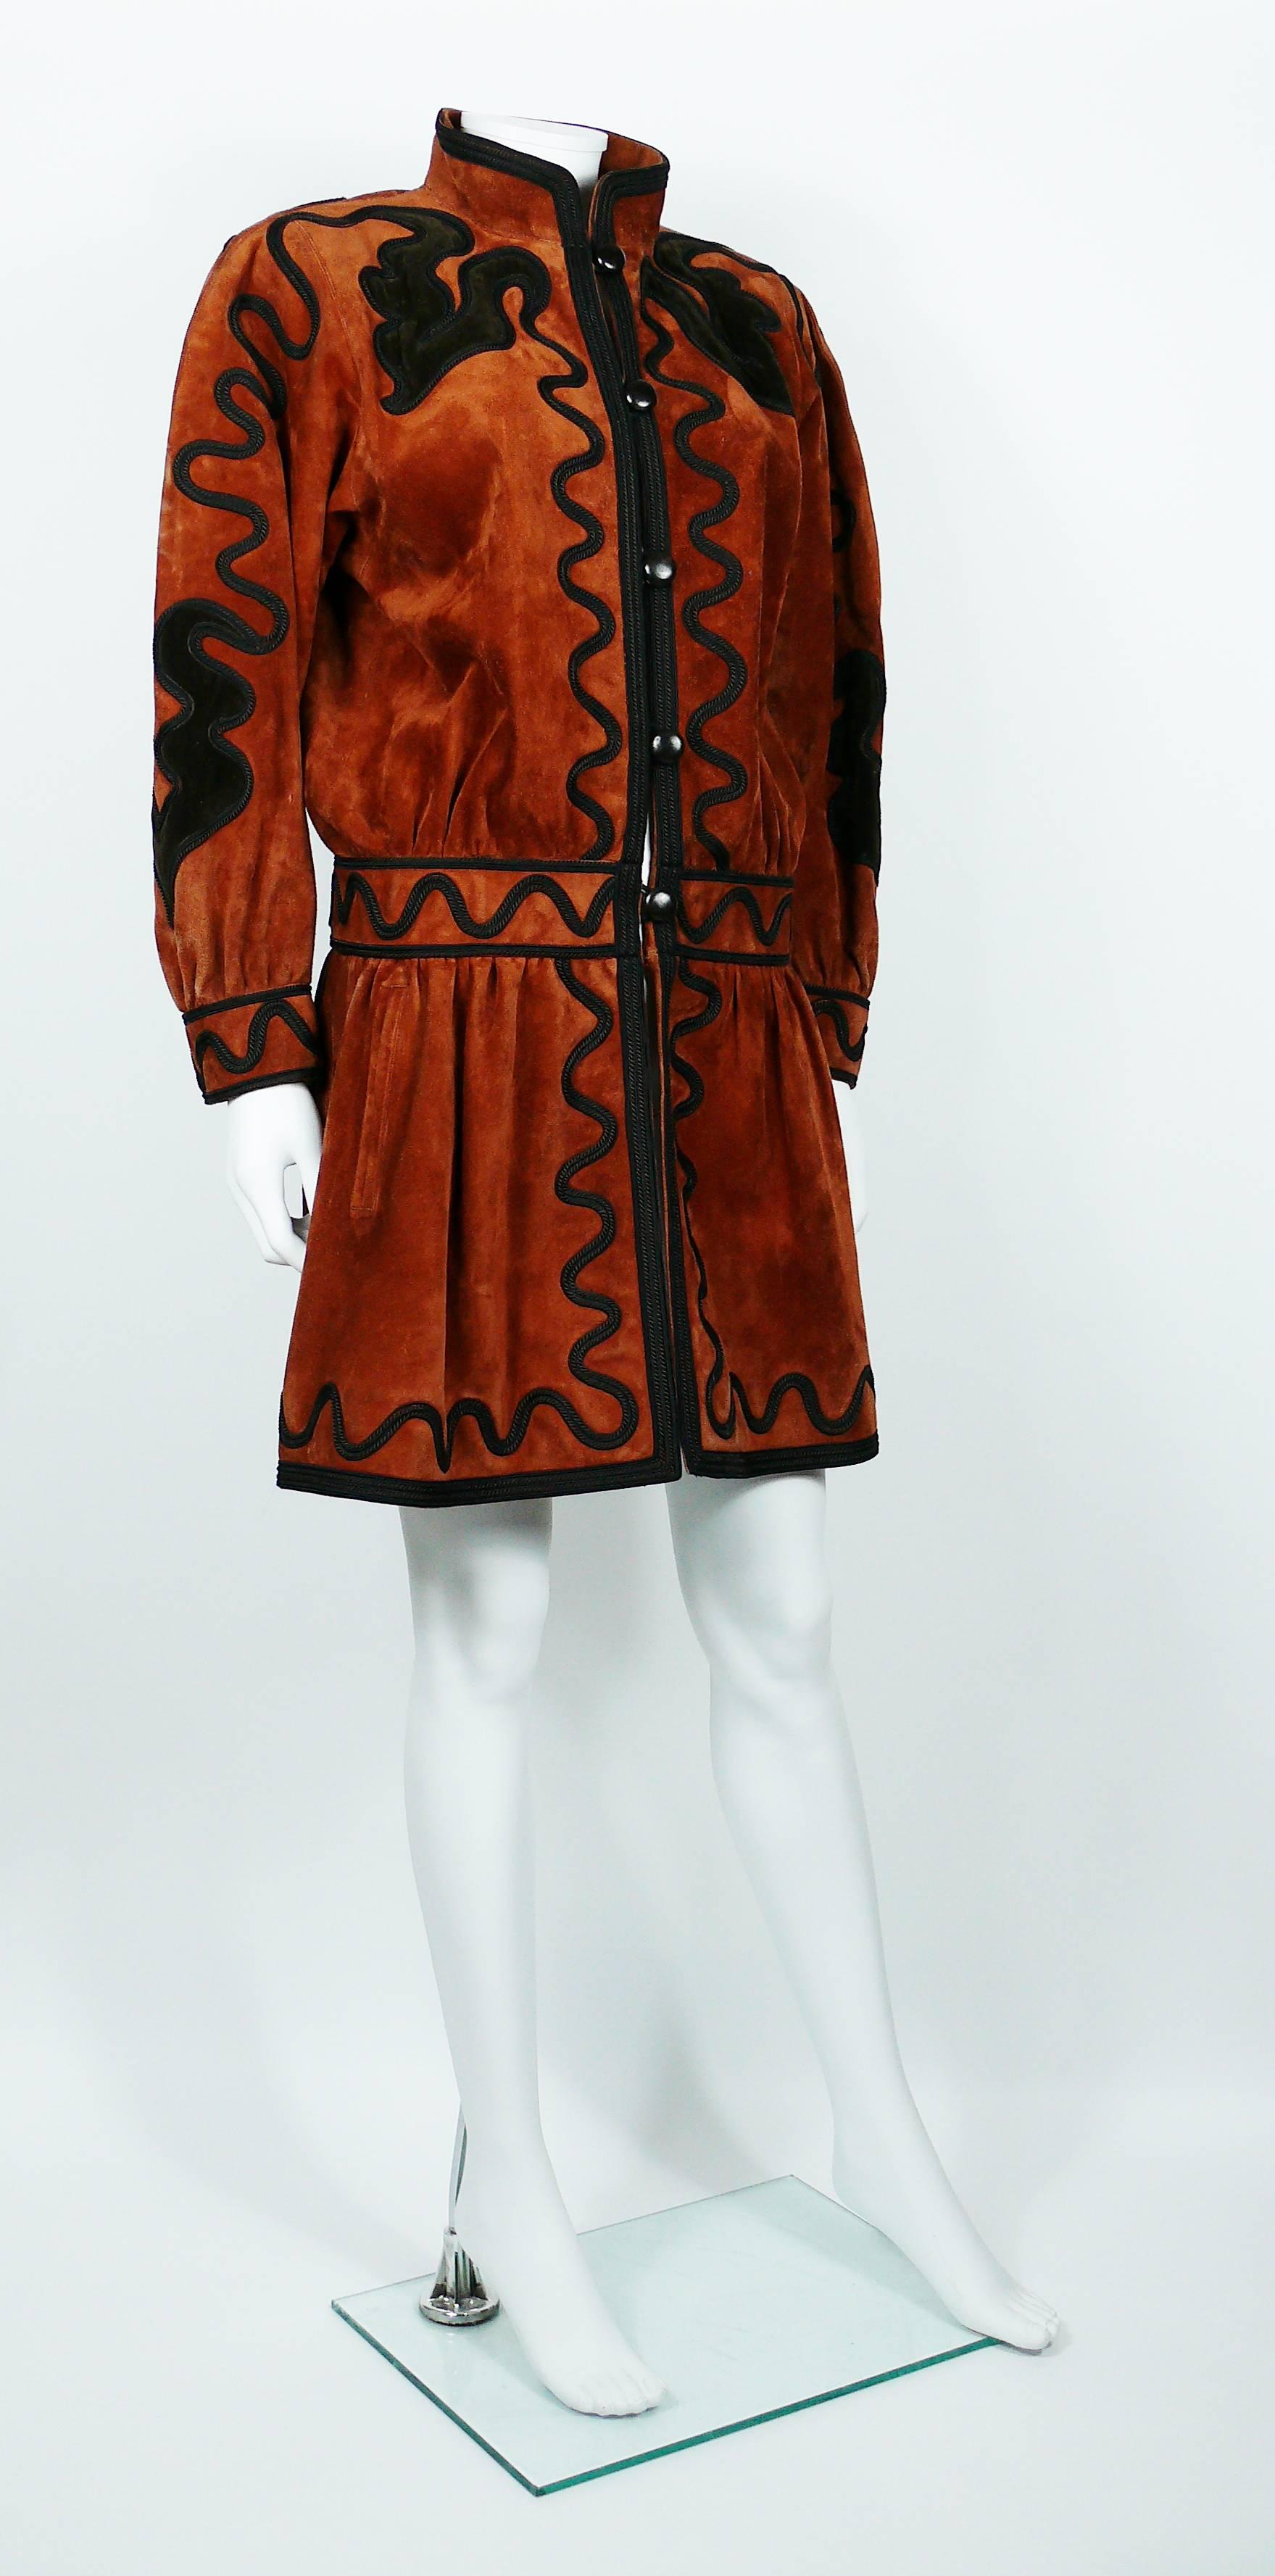 YVES SAINT LAURENT rare Haute Couture Russian inspired embroidered suede jacket from the Fall-Winter 1981-82 Collection.

This jacket features :
- Rust color suede.
- Embroideries and brown velvet inserts;
- Belted low-rise.
- Front buttoning with